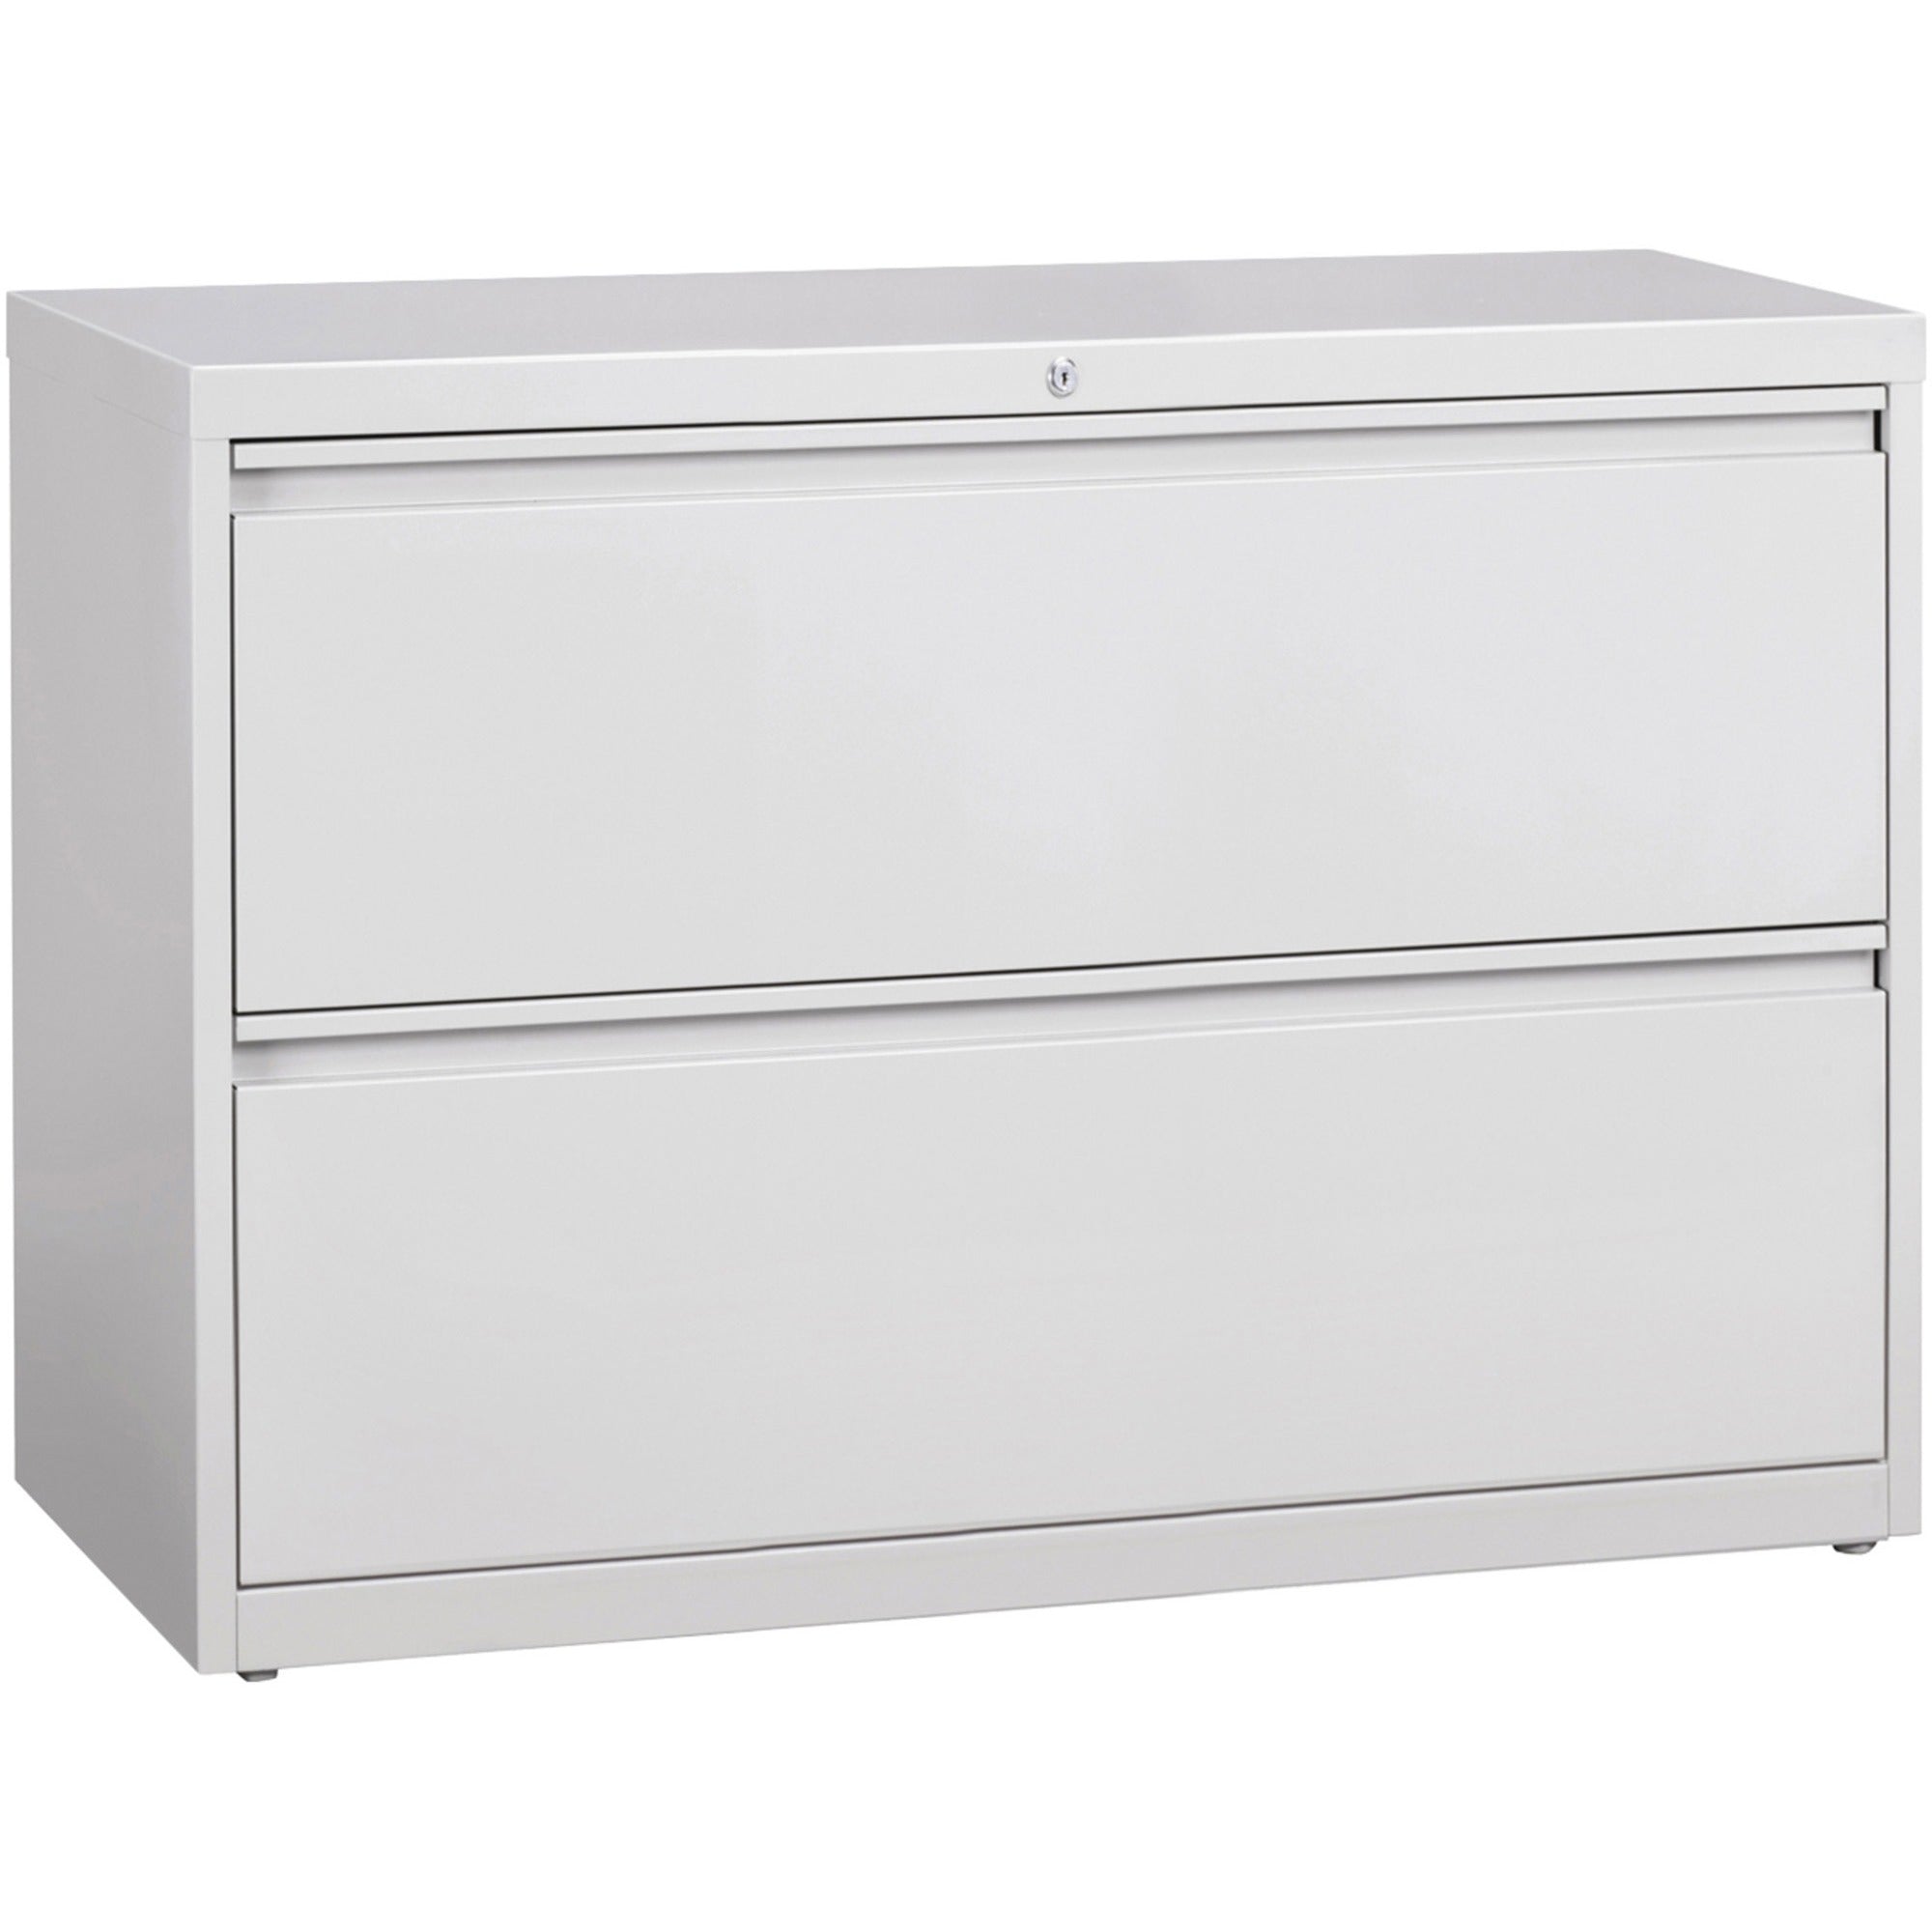 Lorell Fortress Series Lateral File - 42" x 18.6" x 28.1" - 2 x Drawer(s) for File - Legal, Letter, A4 - Lateral - Rust Proof, Leveling Glide, Ball-bearing Suspension, Interlocking, Label Holder - Light Gray - Baked Enamel - Steel - Recycled - 